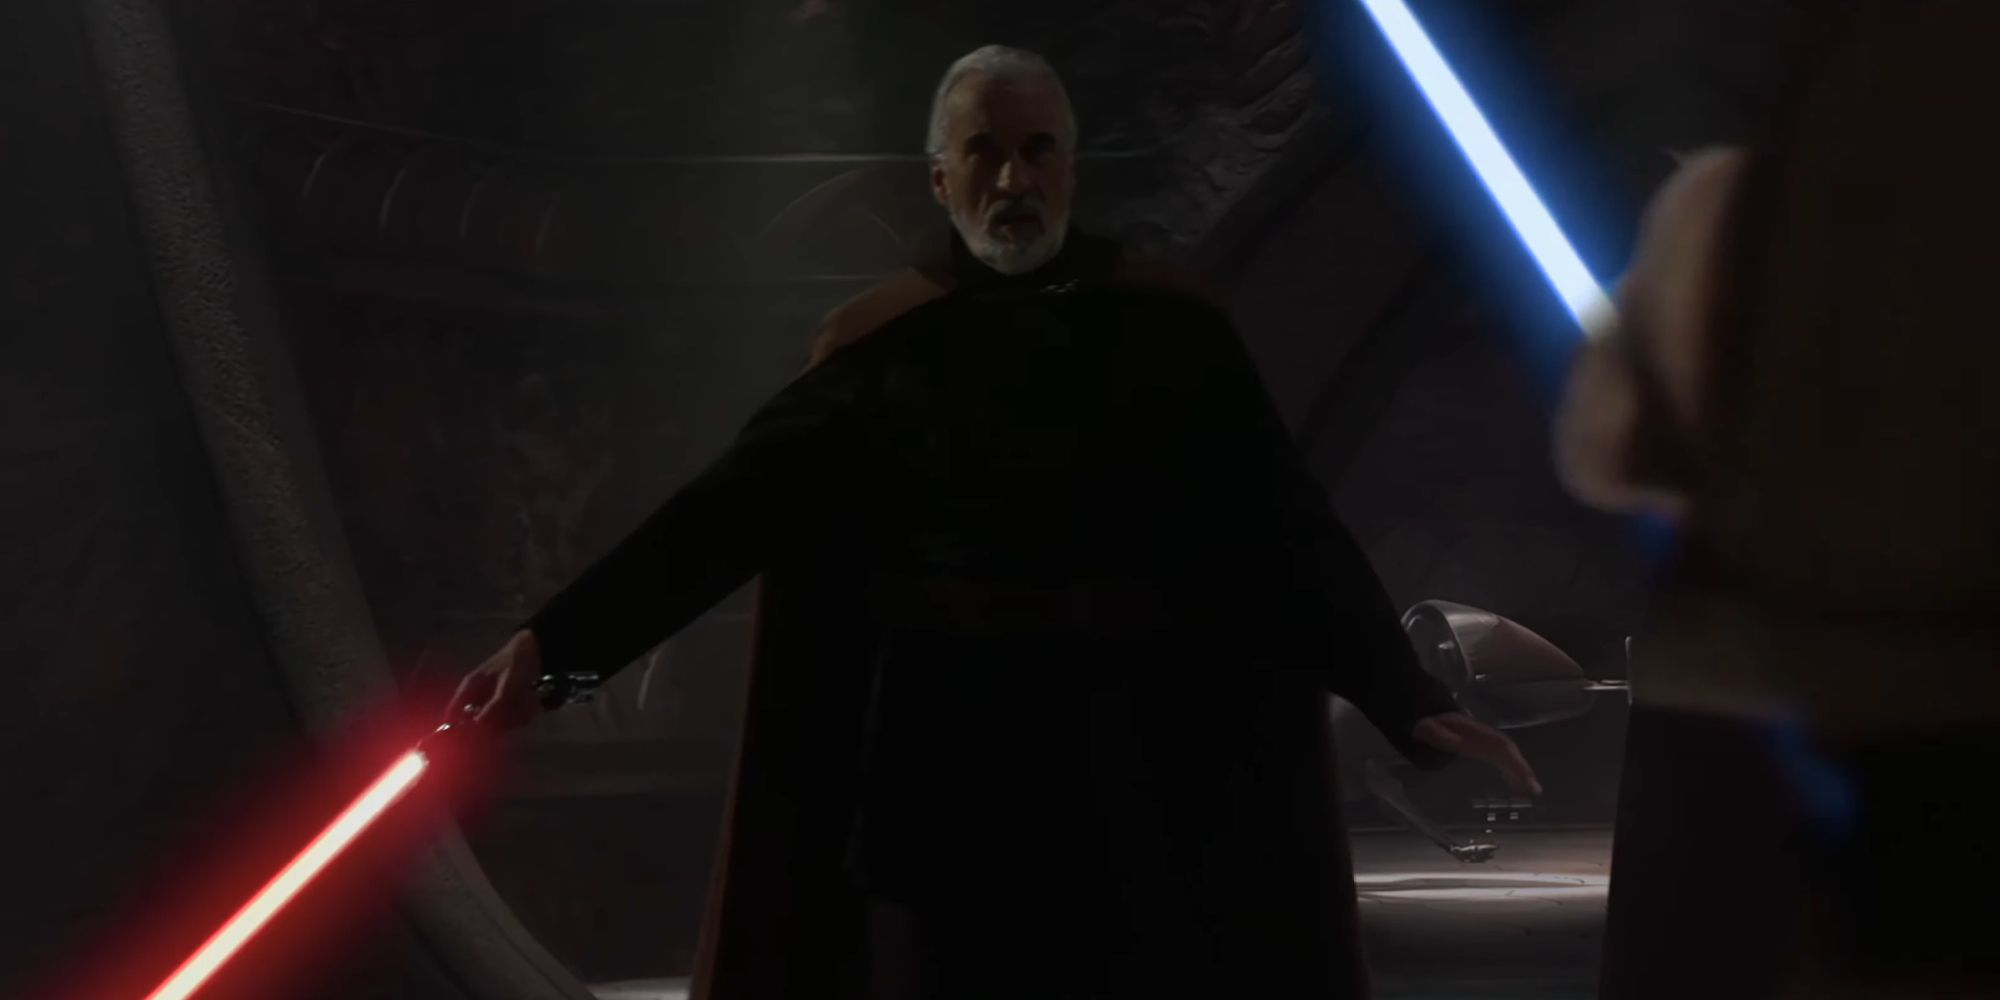 Count Dooku igniting his lightsaber before Obi-Wan Kenobi in Attack Of The Clones